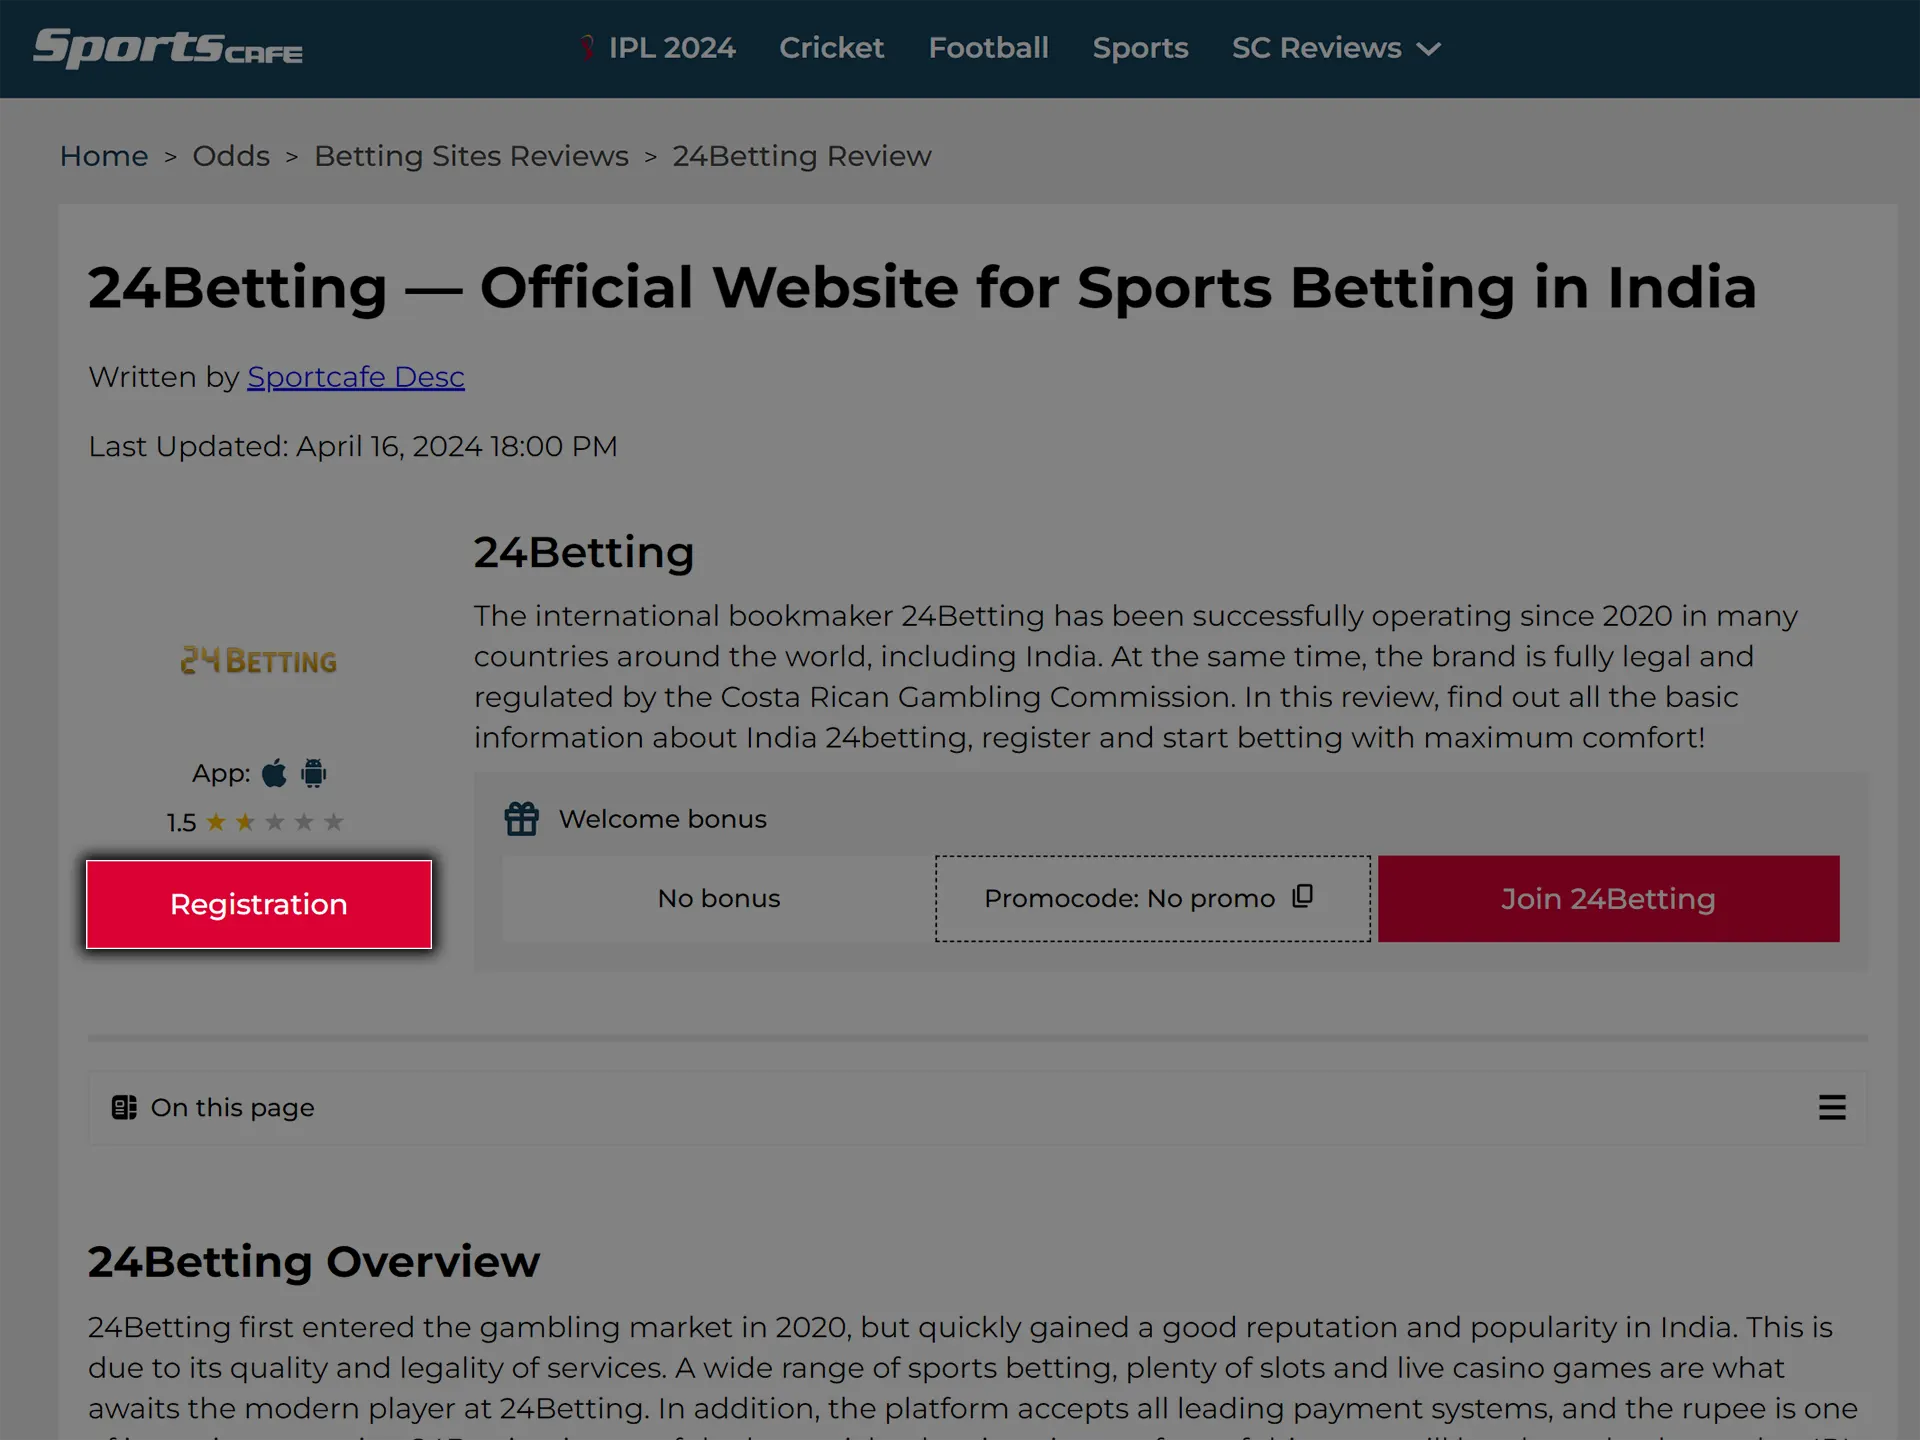 Follow the link to open the 24Betting website.